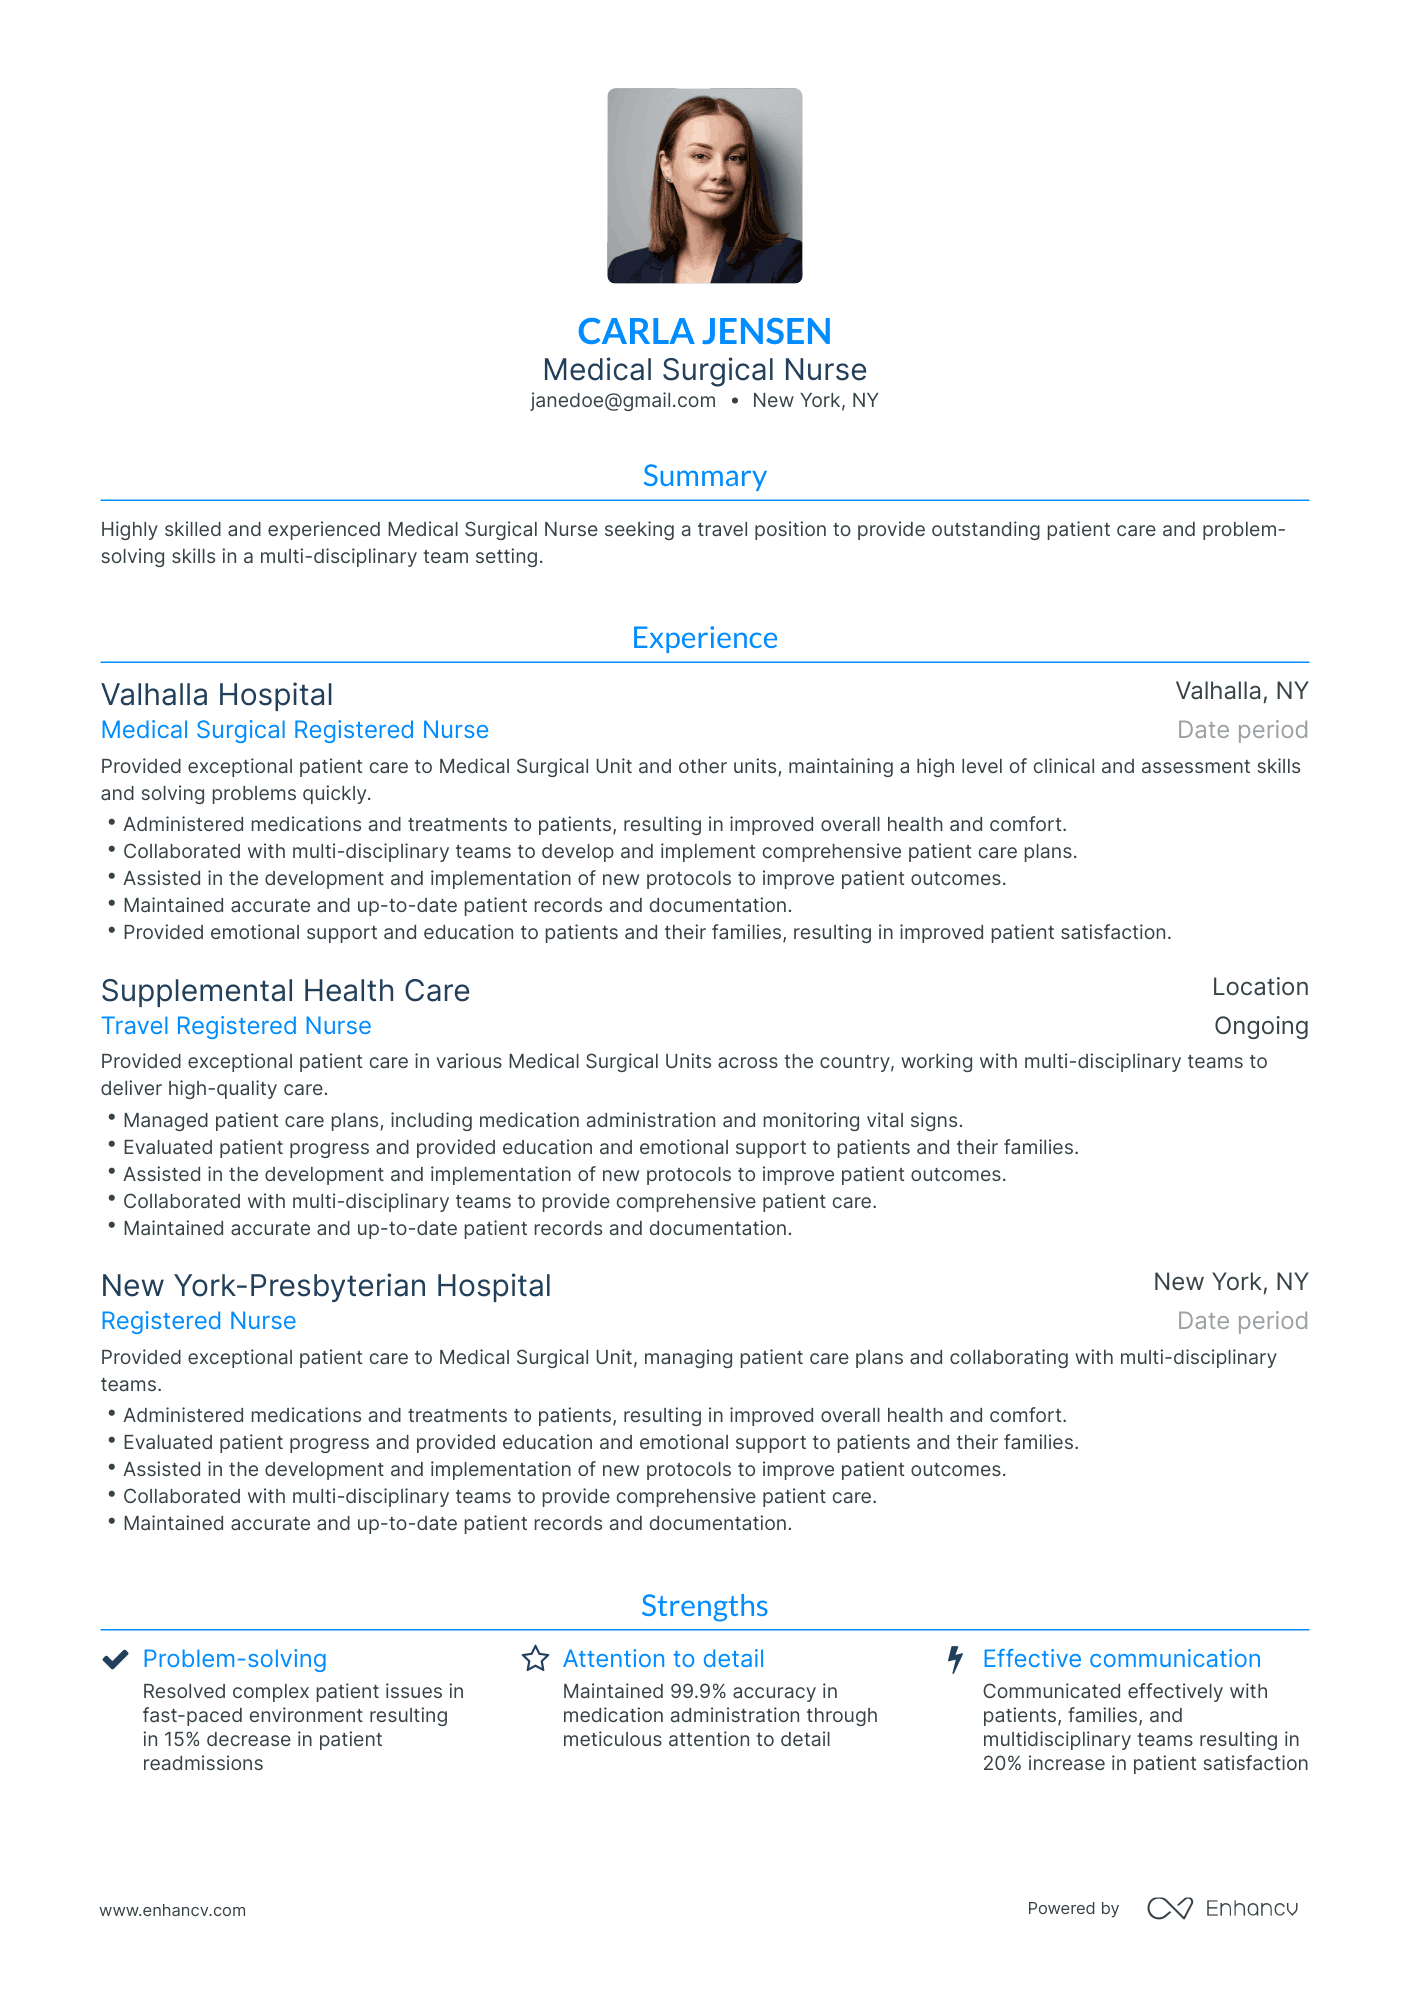 Traditional Medical Surgical Nurse Resume Template